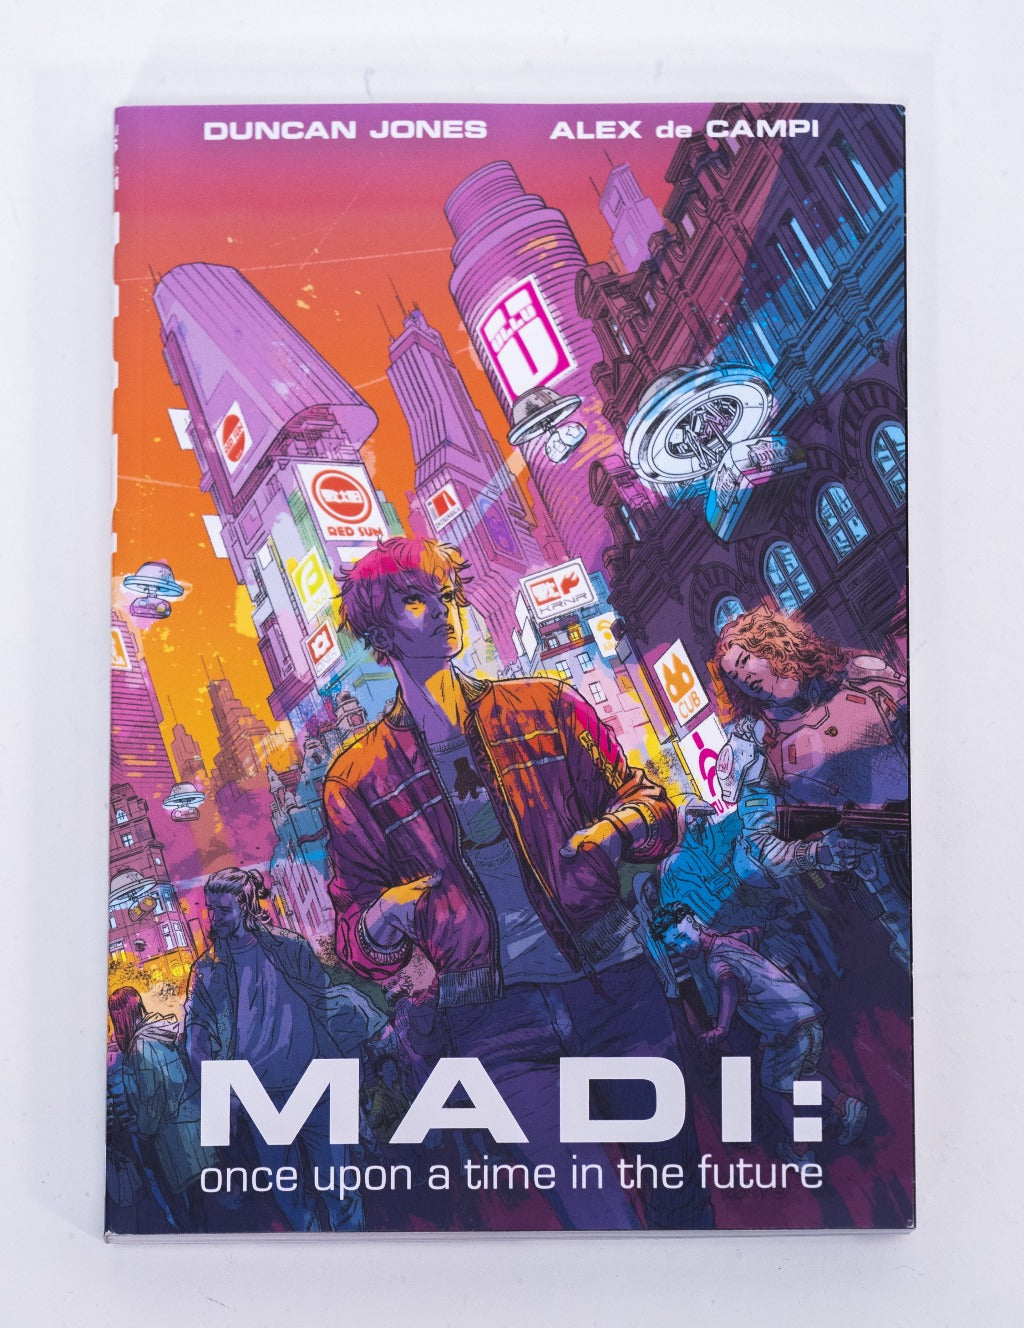 MADI: Once Upon A Time In The Future (5168864657548)